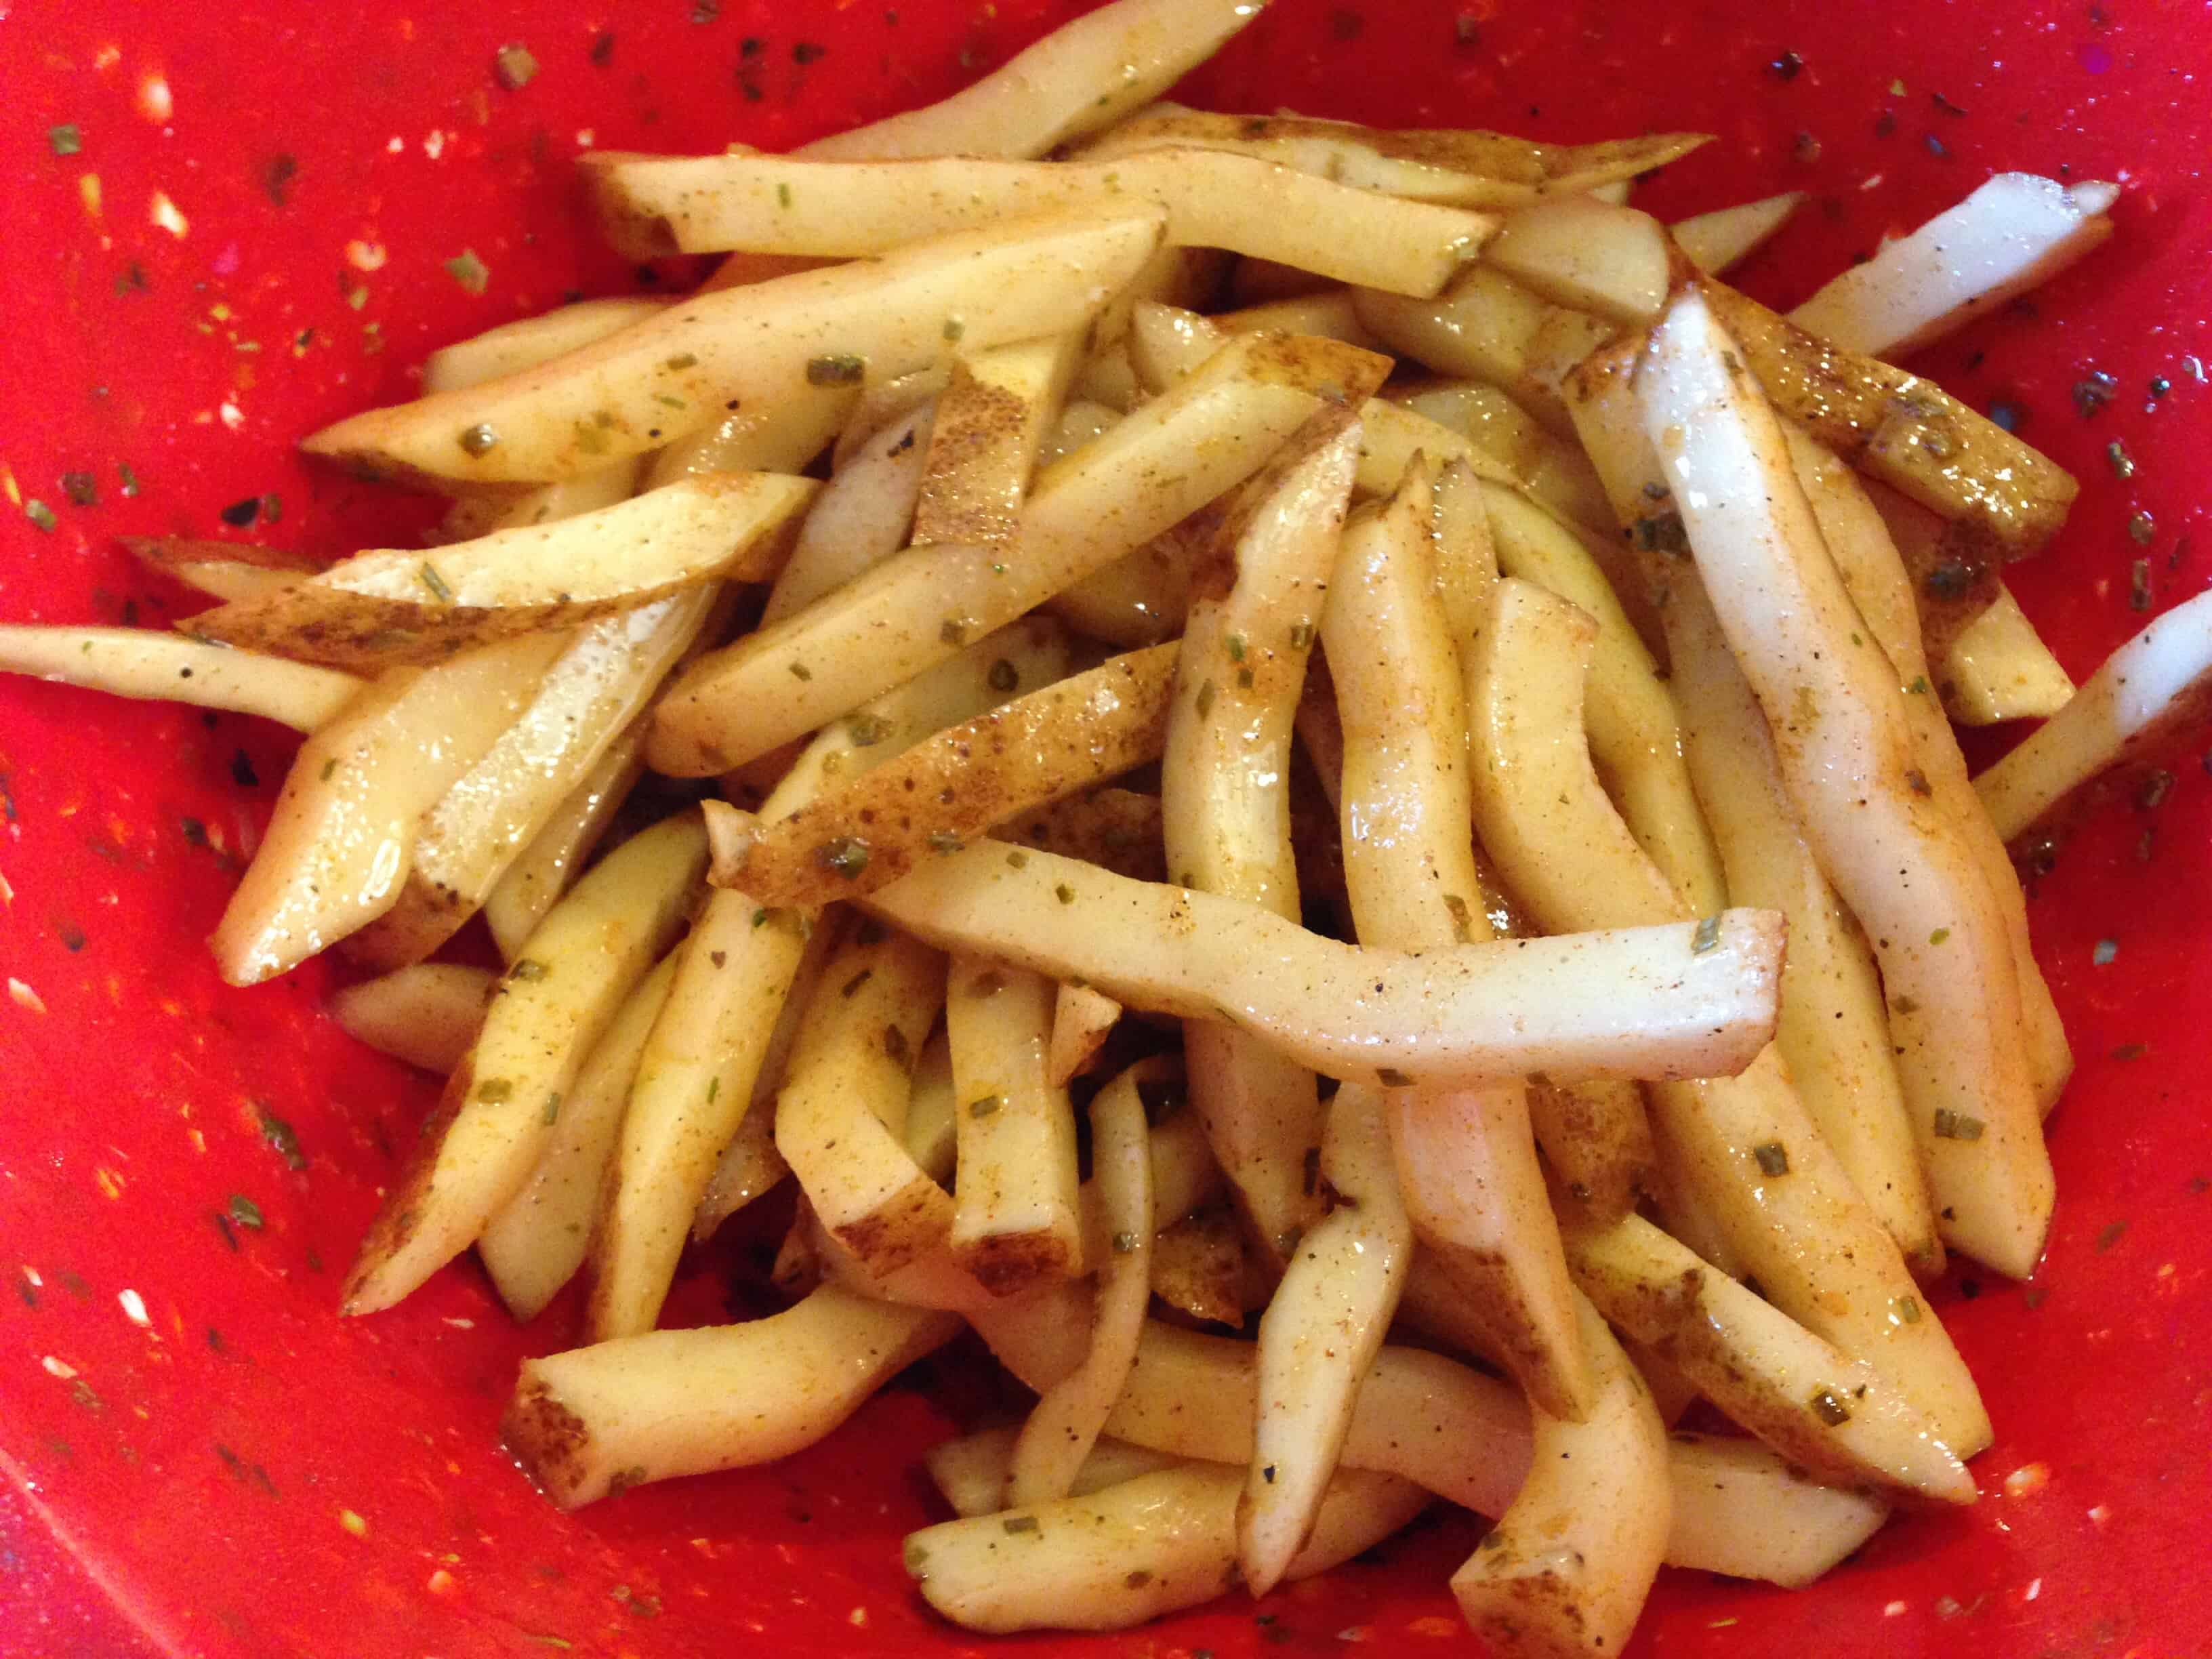 Tossing the fries with oil and seasonings before they go in the air fryer